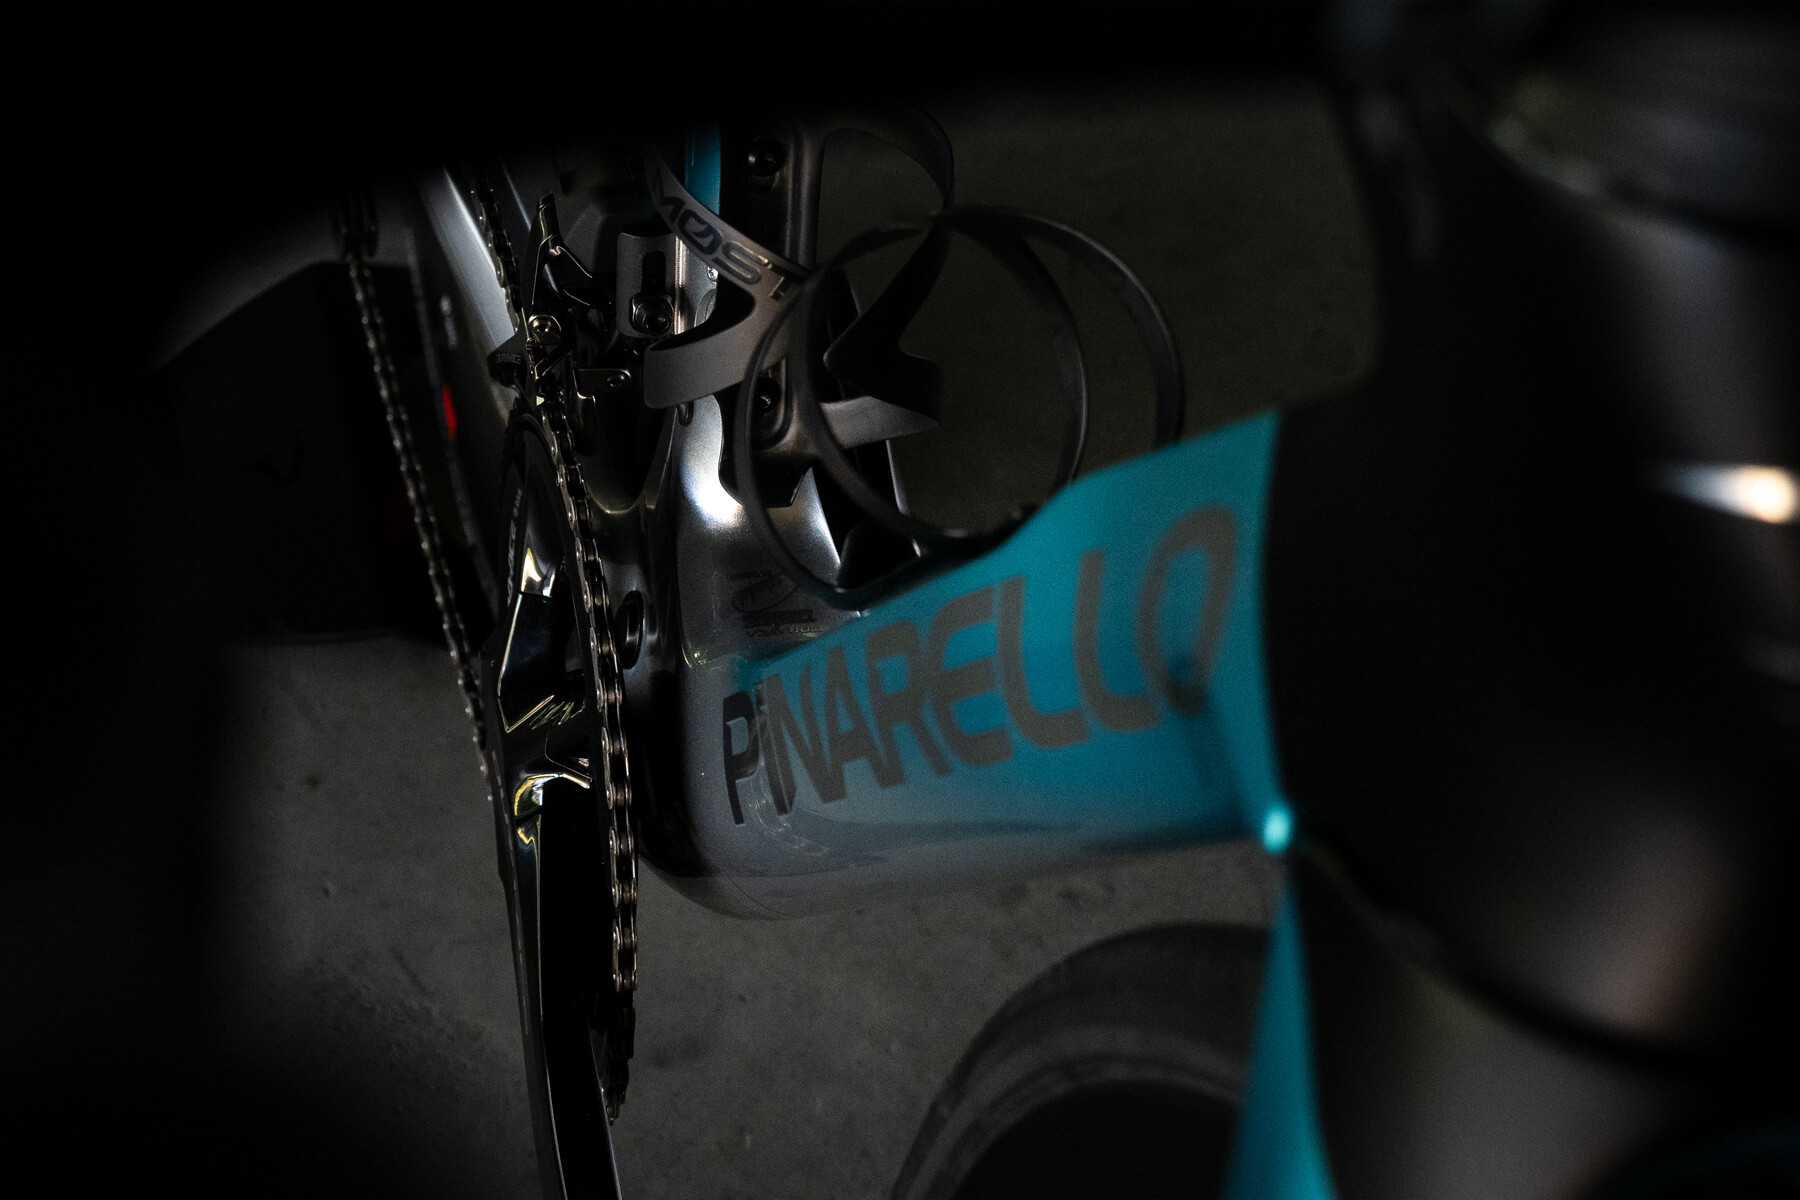 PINARELLO Dogma F: exceptional performance, with style